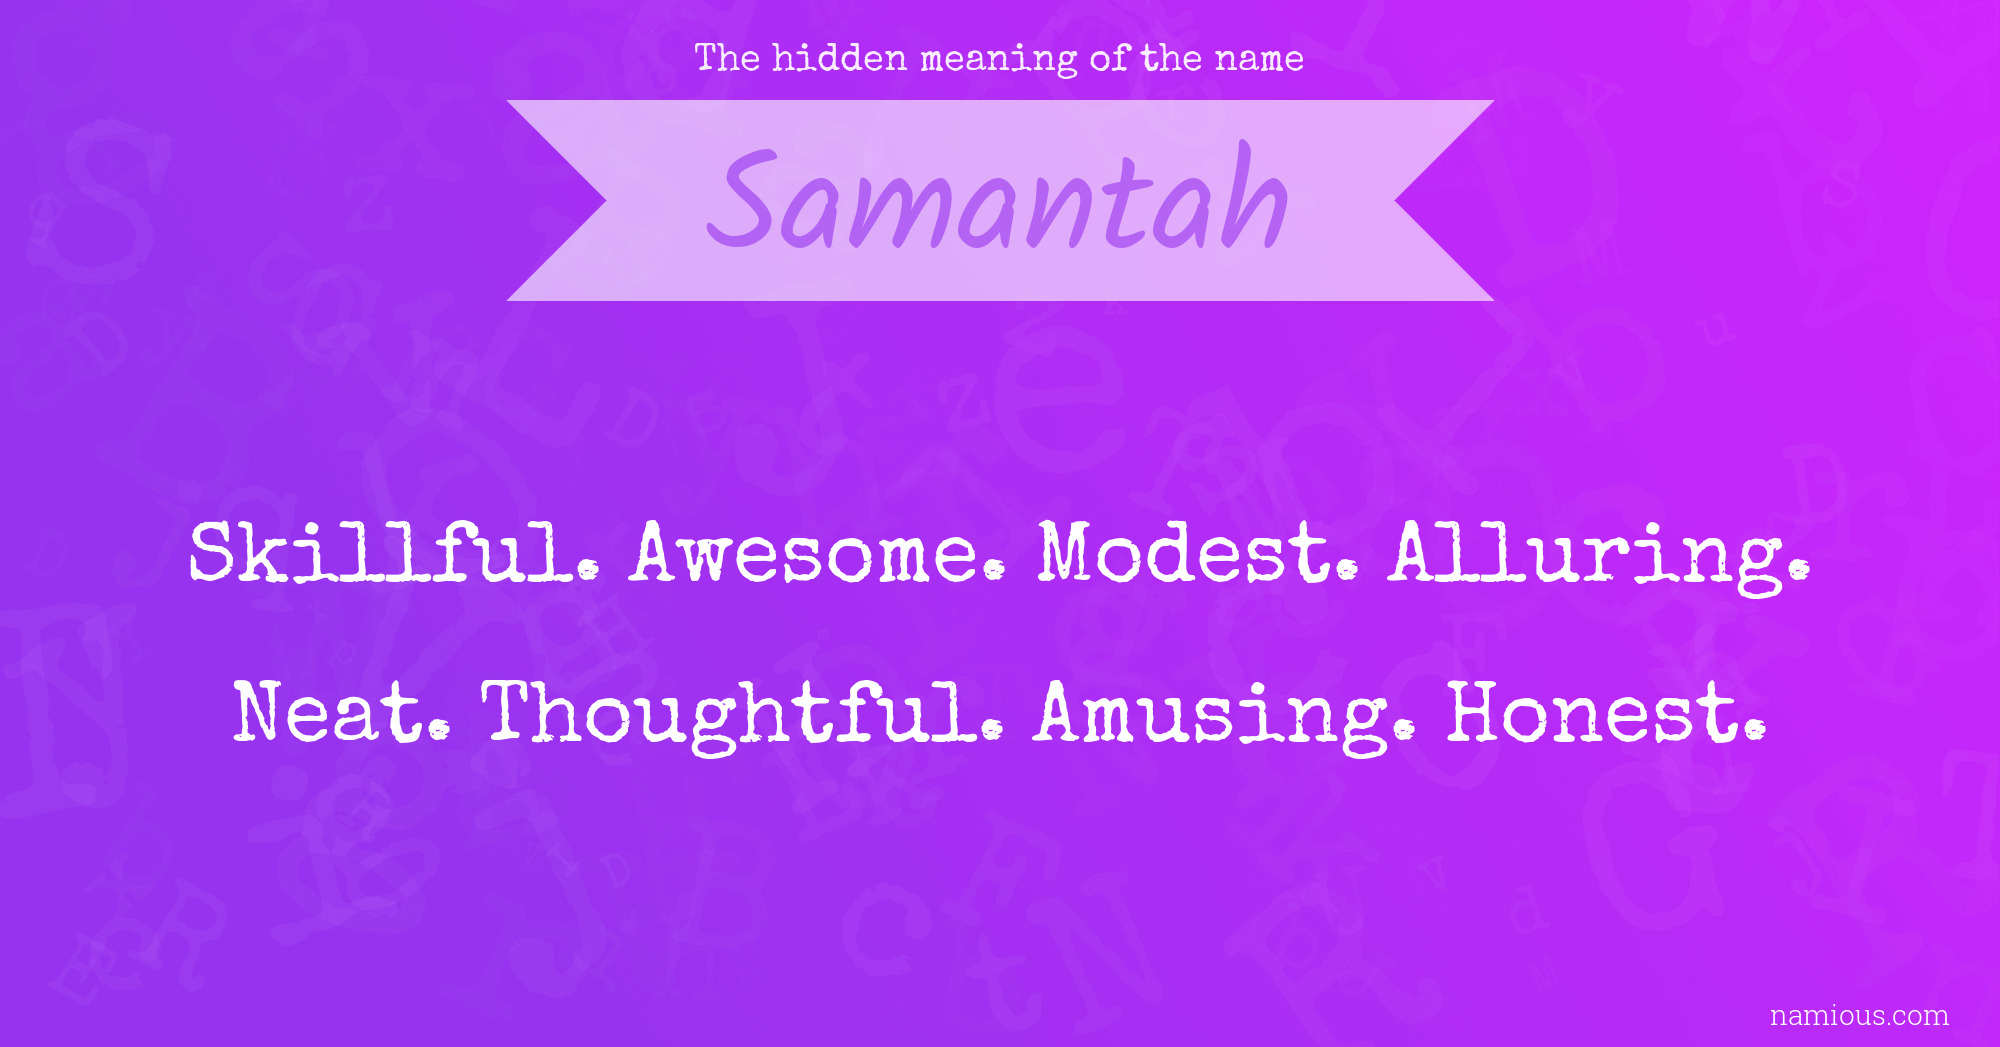 The hidden meaning of the name Samantah